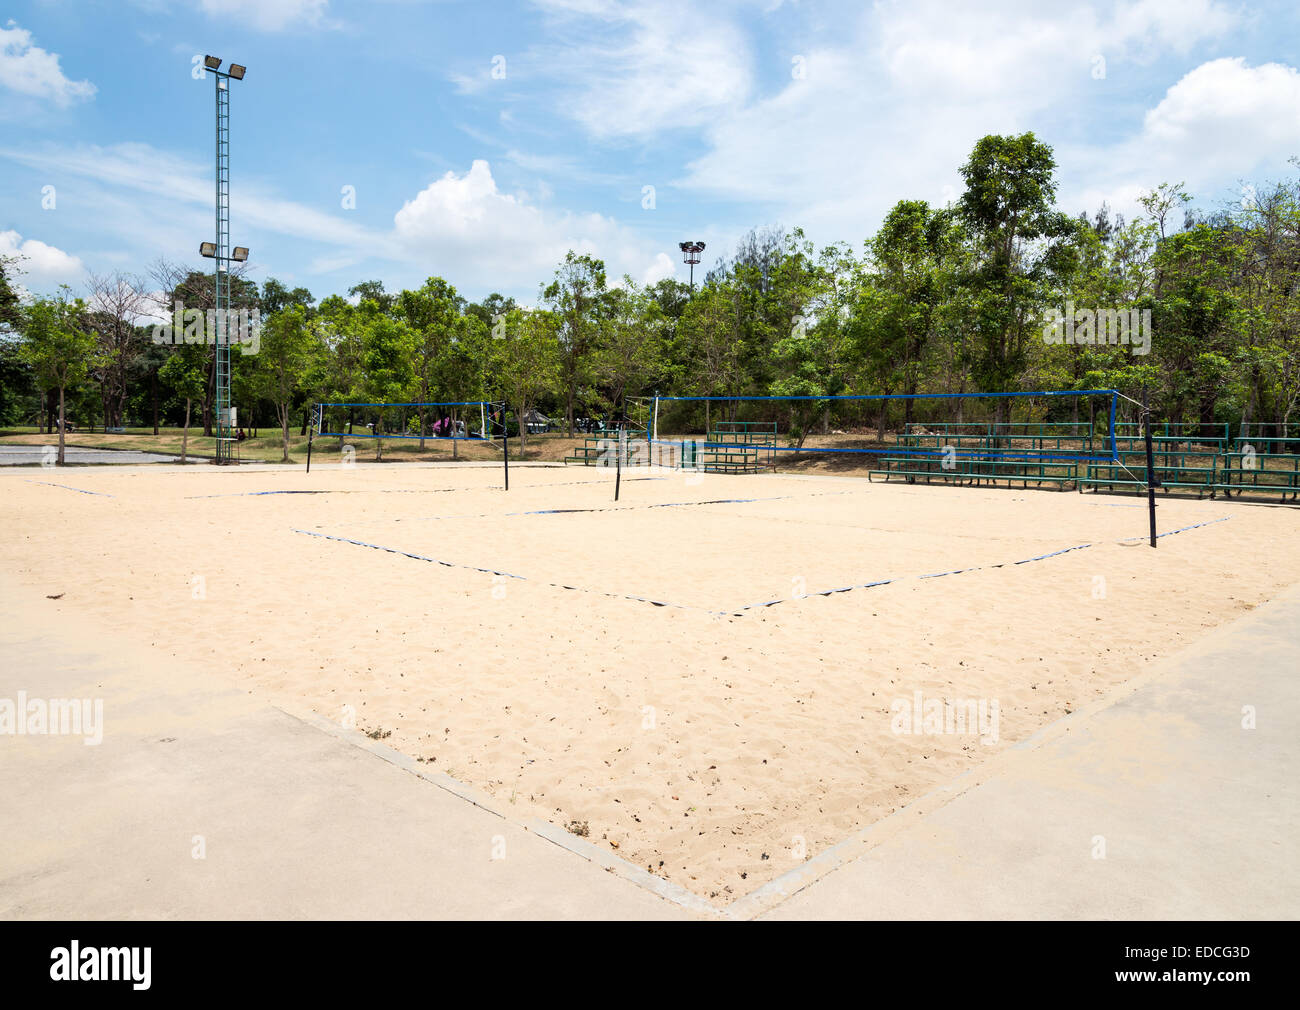 Beach volleyball field in the urban park. Stock Photo